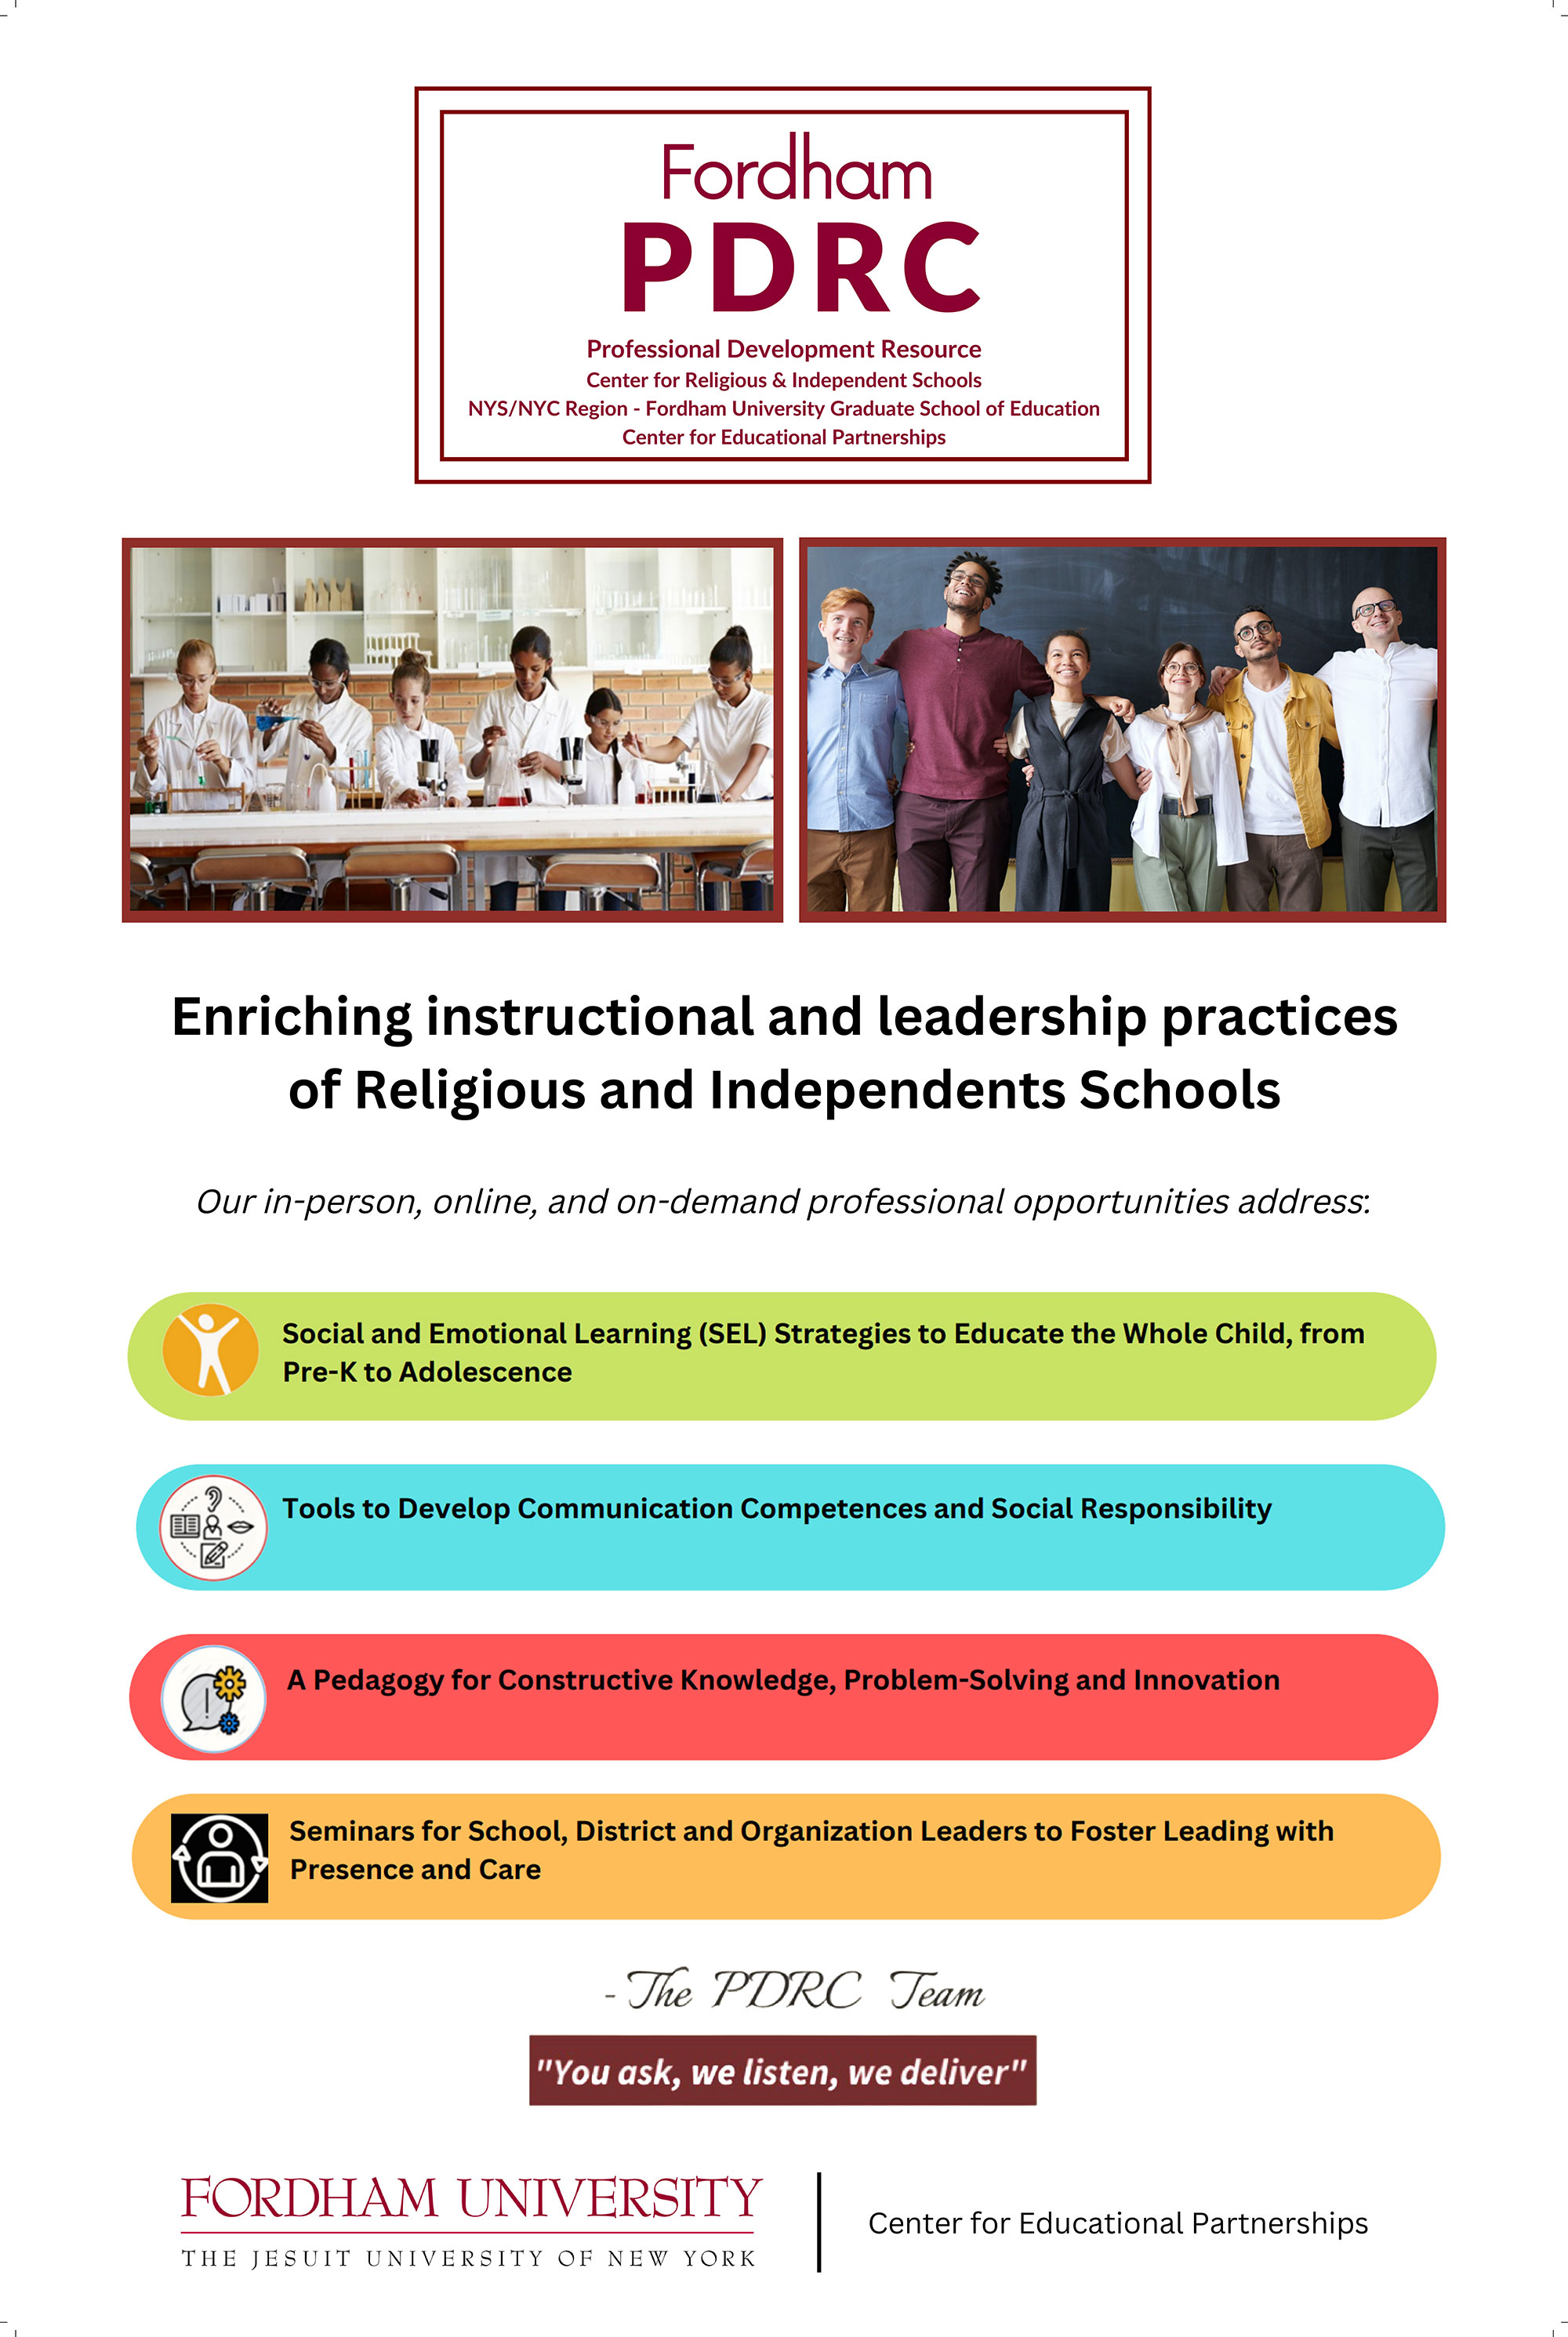 PDRC enriching instructional and leadership practices poster